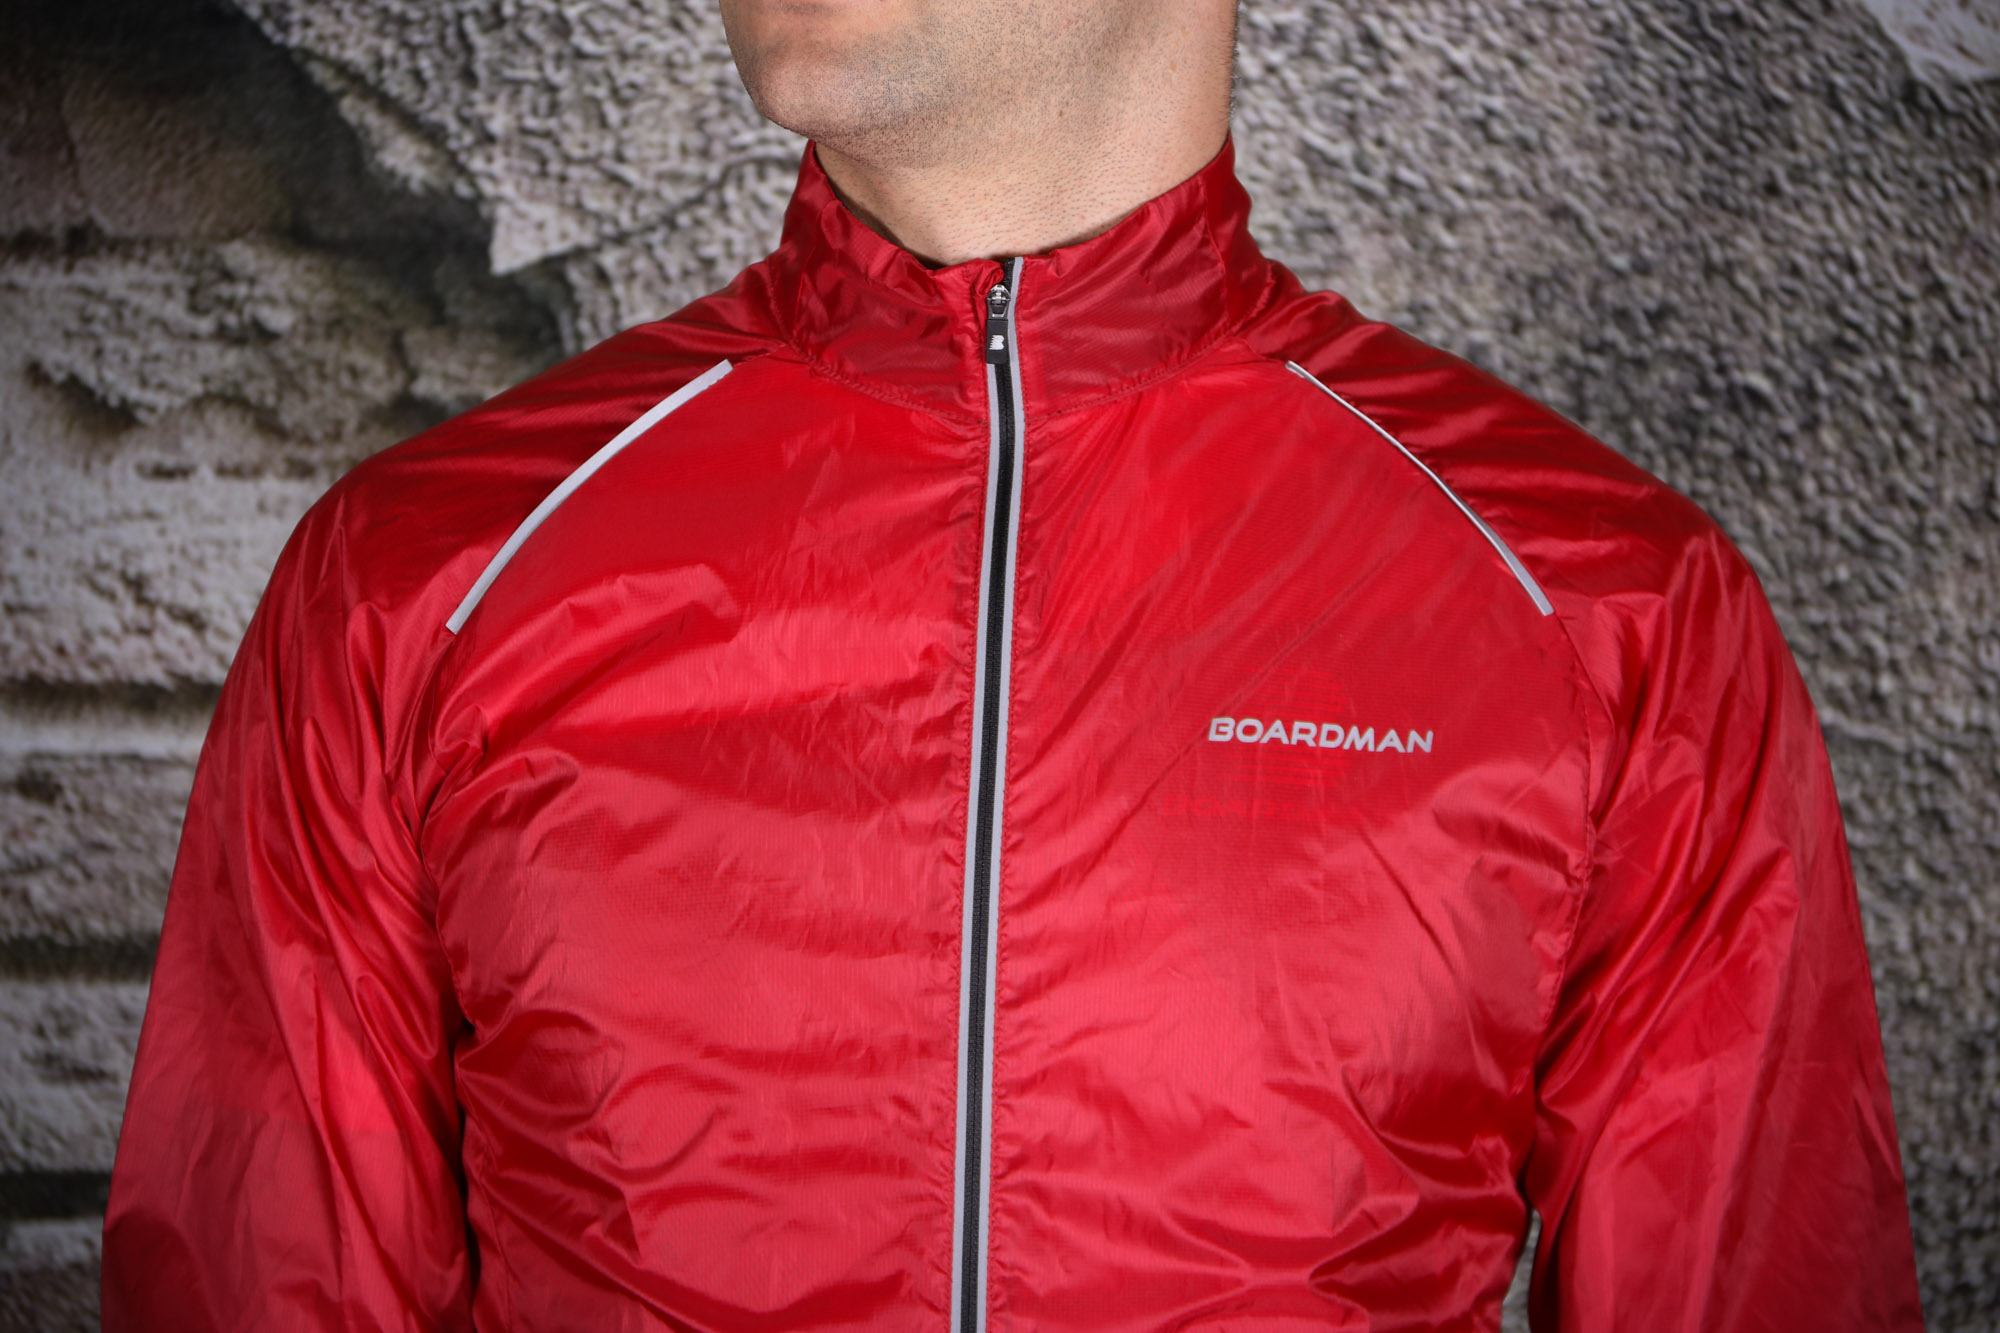 MADISON SPORTIVE STRATOS MEN'S SHOWERPROOF JACKET CYCLING CLOTHING